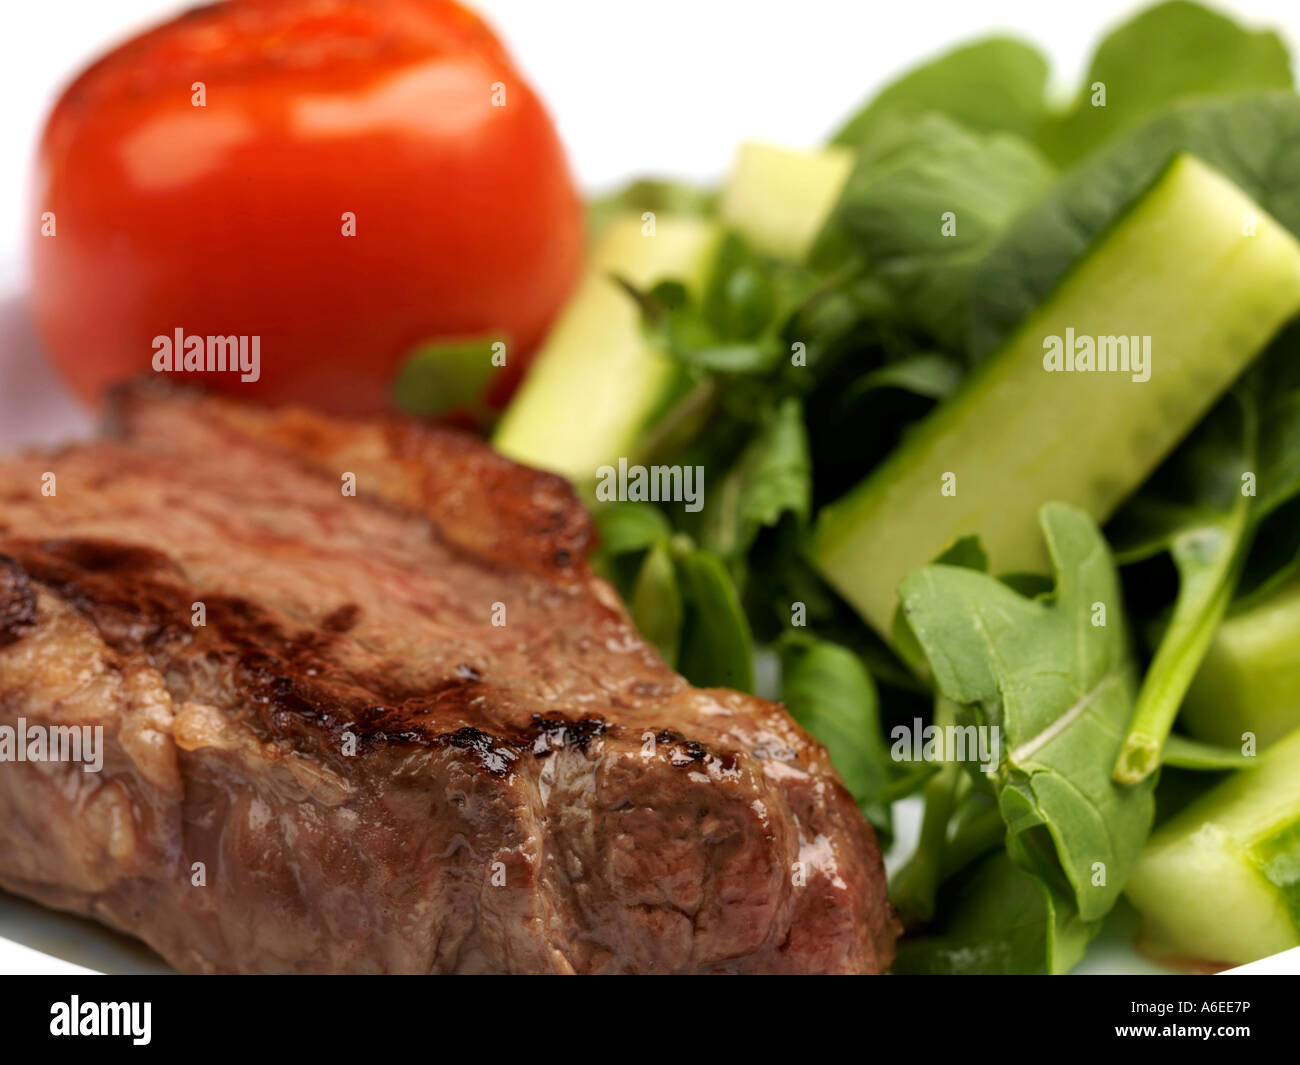 Freshly Grilled Lean Rump Steak with Salad Against A White Background With No People Stock Photo